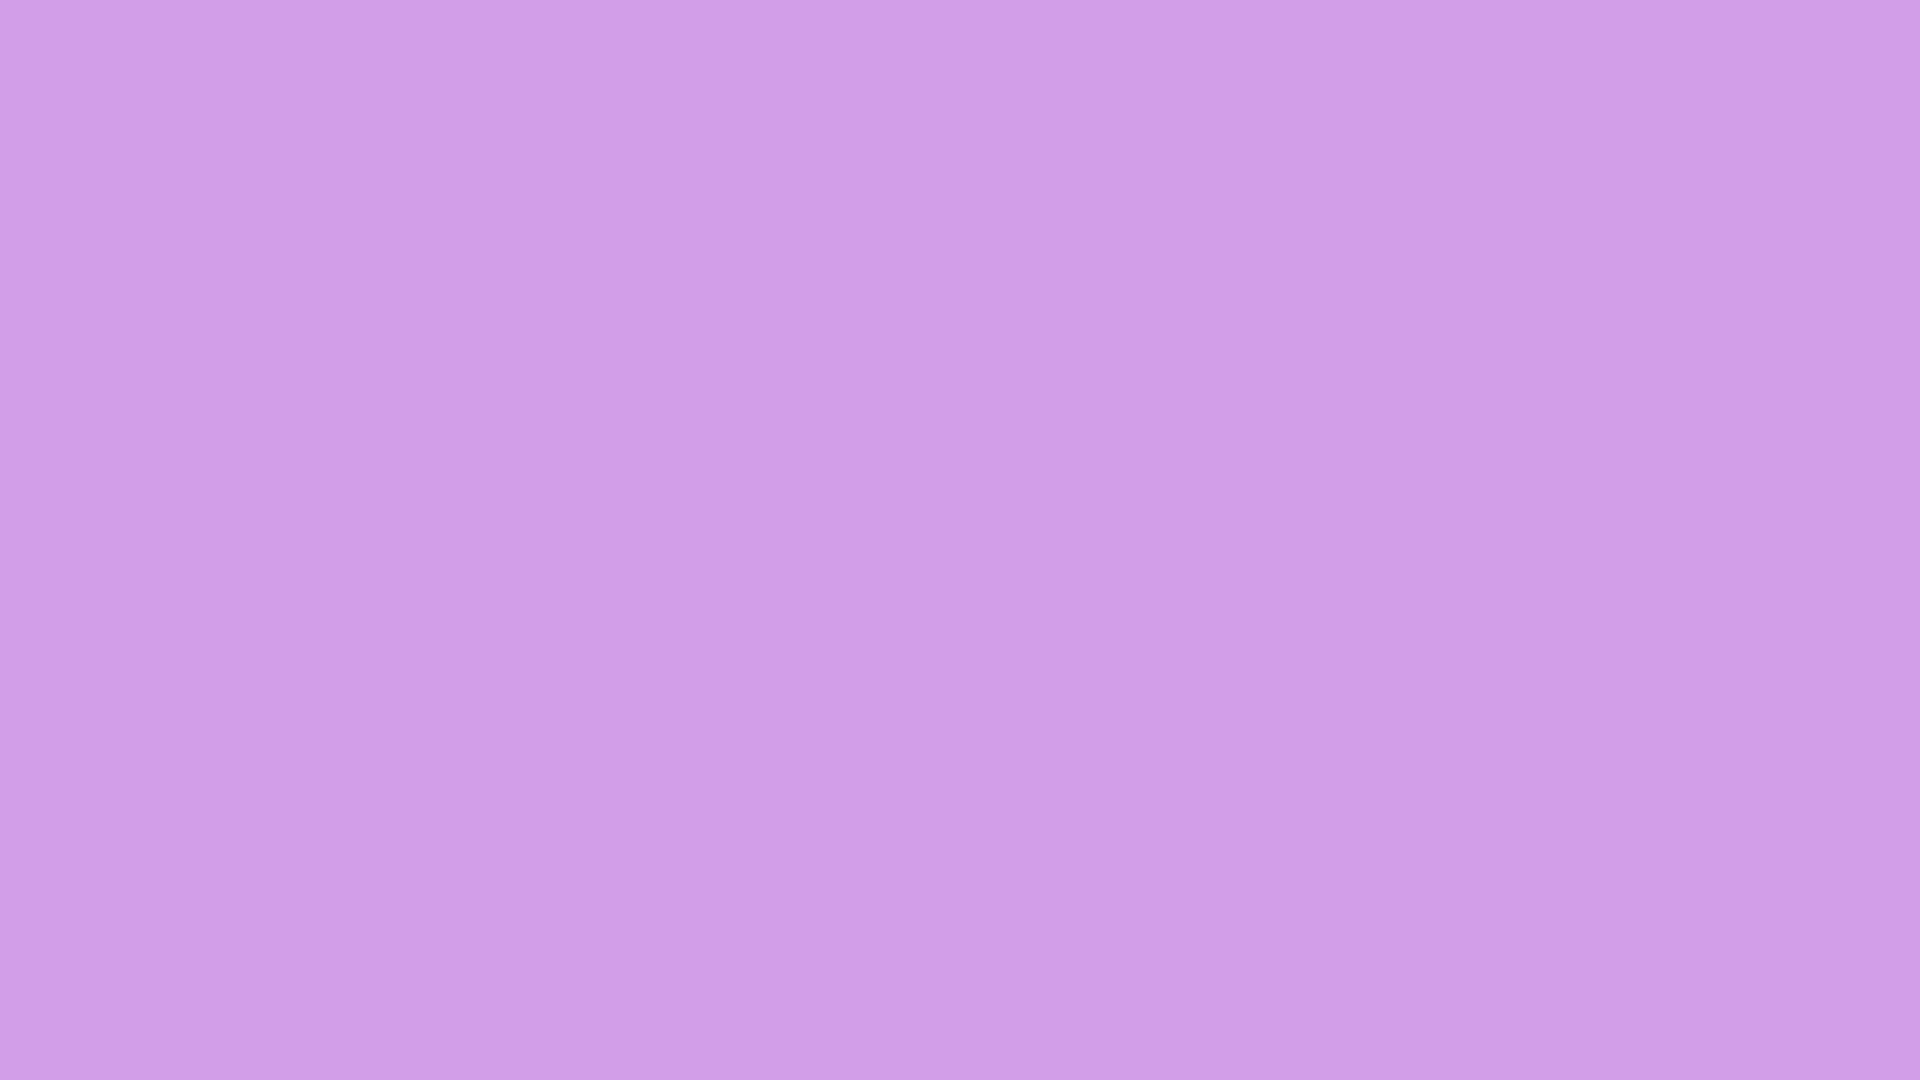 A light purple solid background with a minimal but luxurious look.